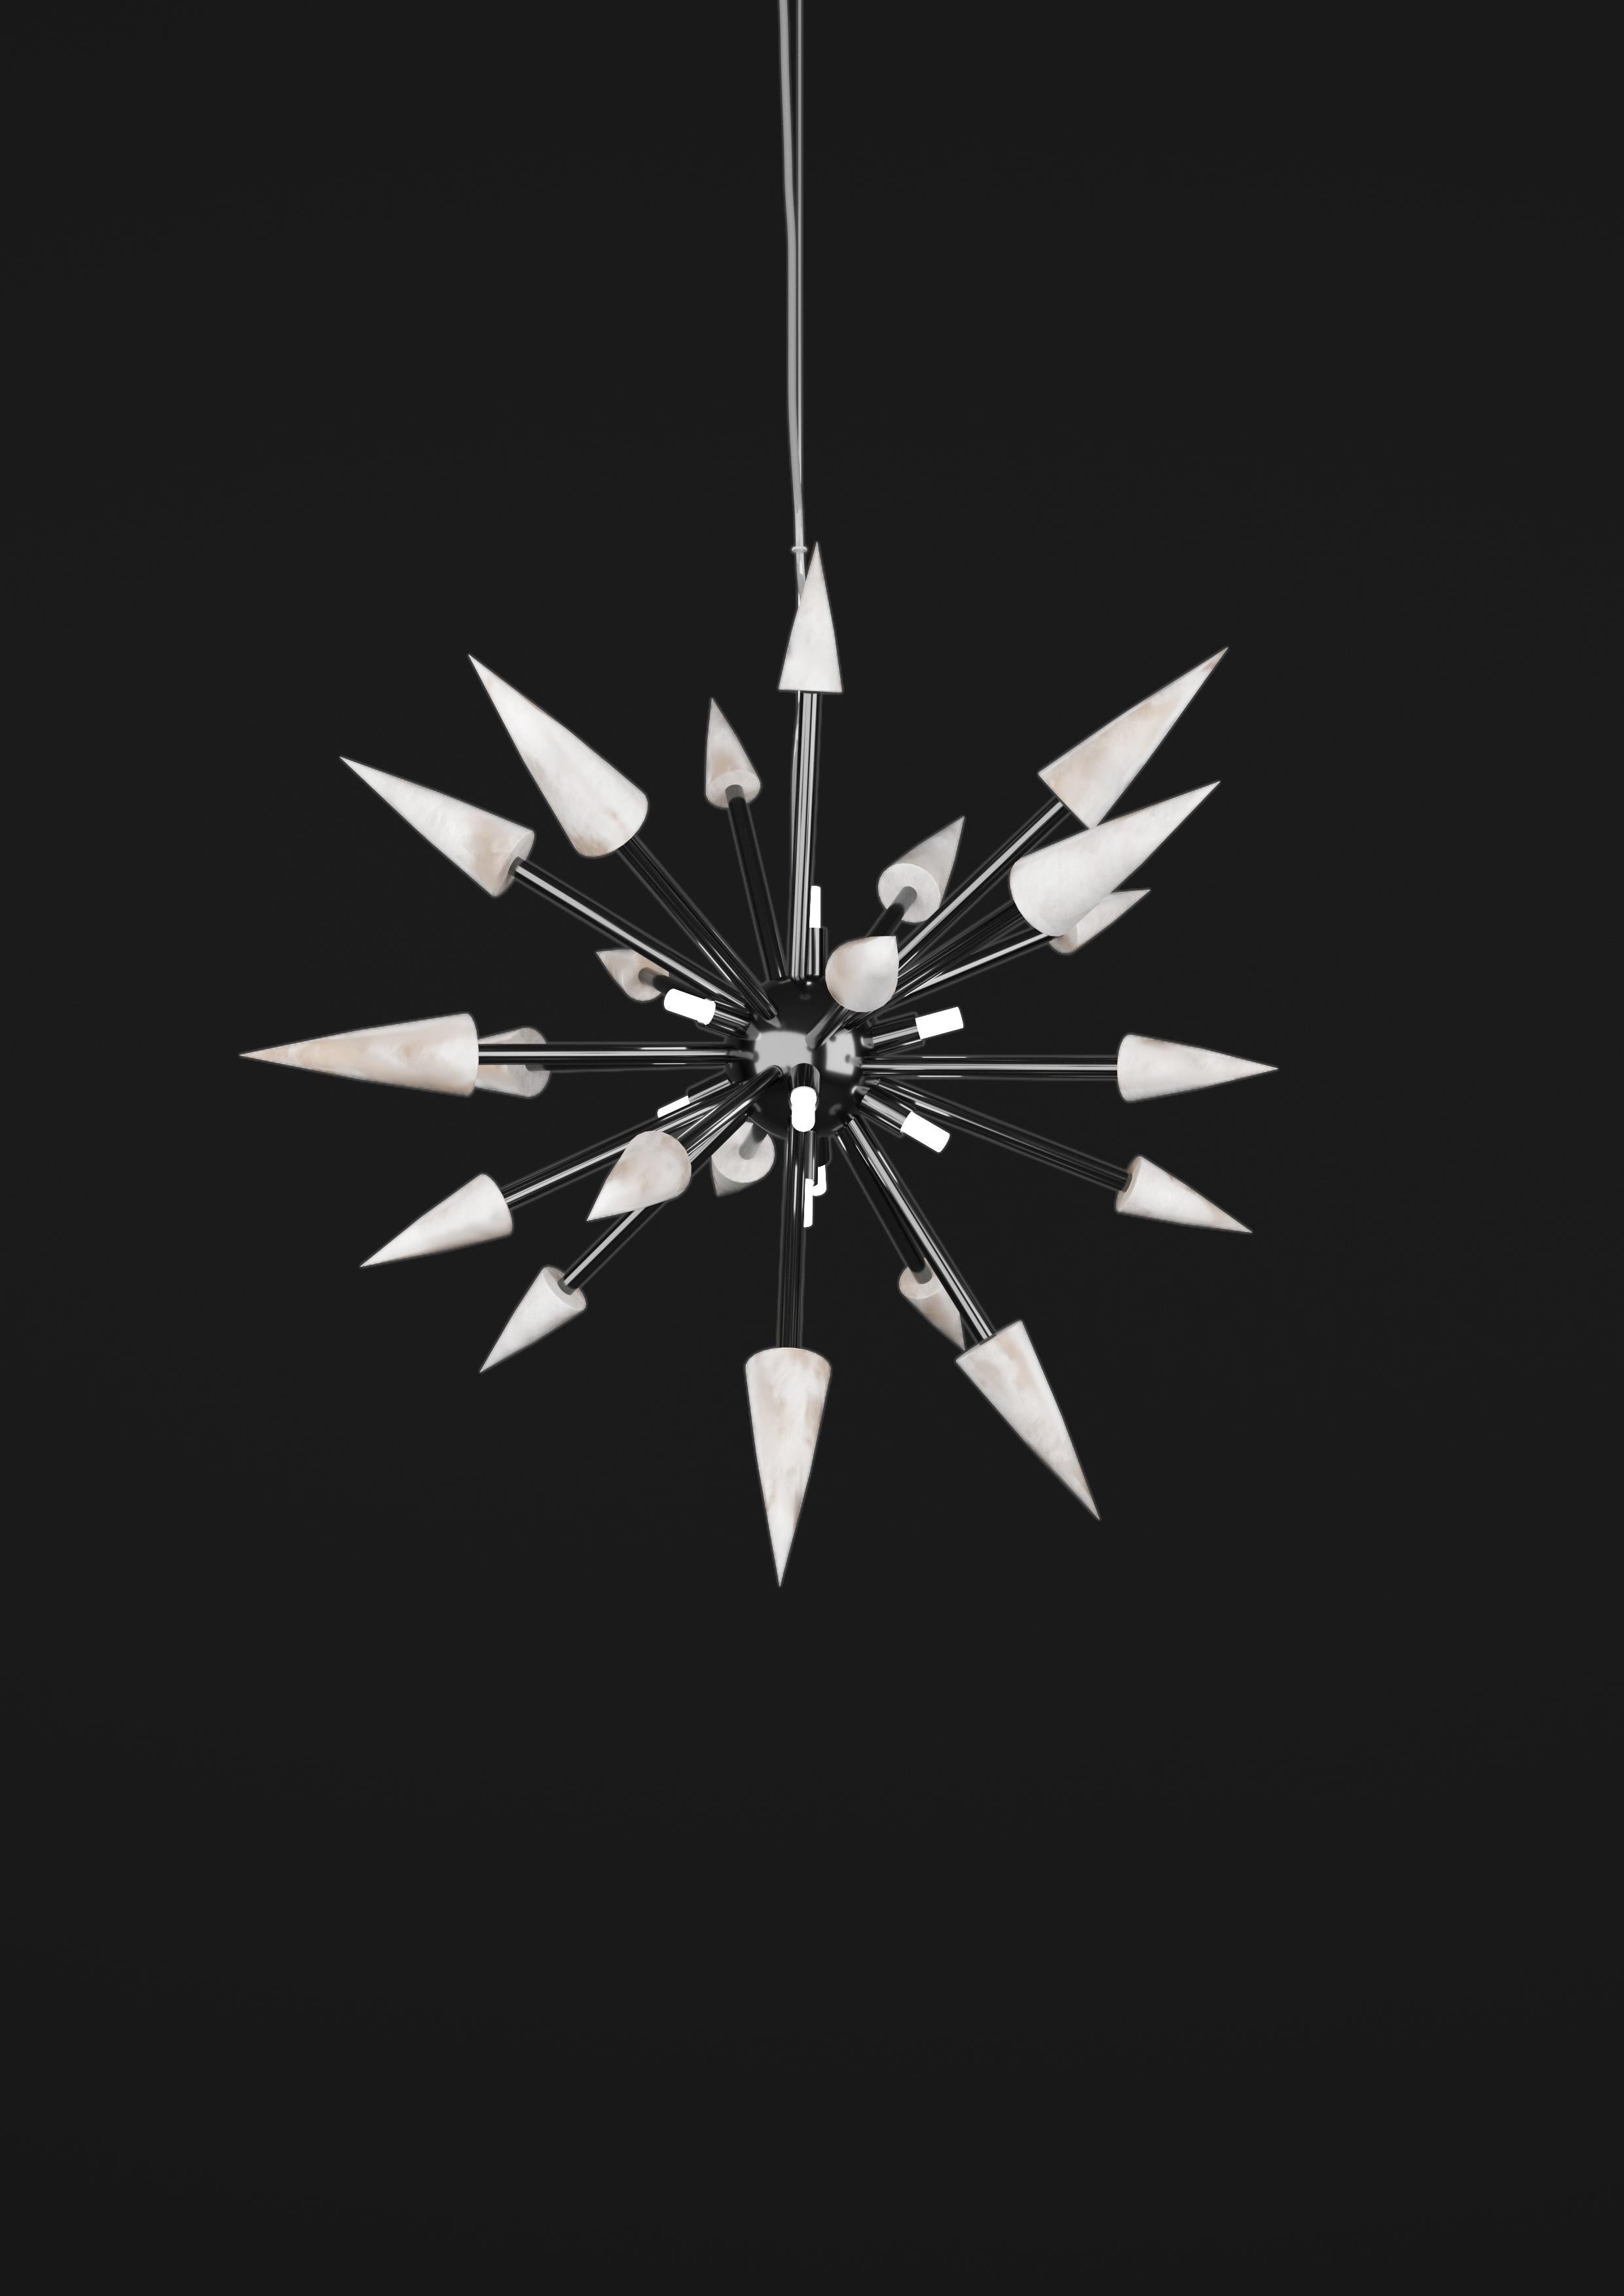 Perseo 50 Shiny Black Metal Pendant Lamp by Alabastro Italiano
Dimensions: Ø 50 x H 300 cm.
Materials: White alabaster and metal.

Available in different finishes: Shiny Silver, Bronze, Brushed Brass, Ruggine of Florence, Brushed Burnished, Shiny